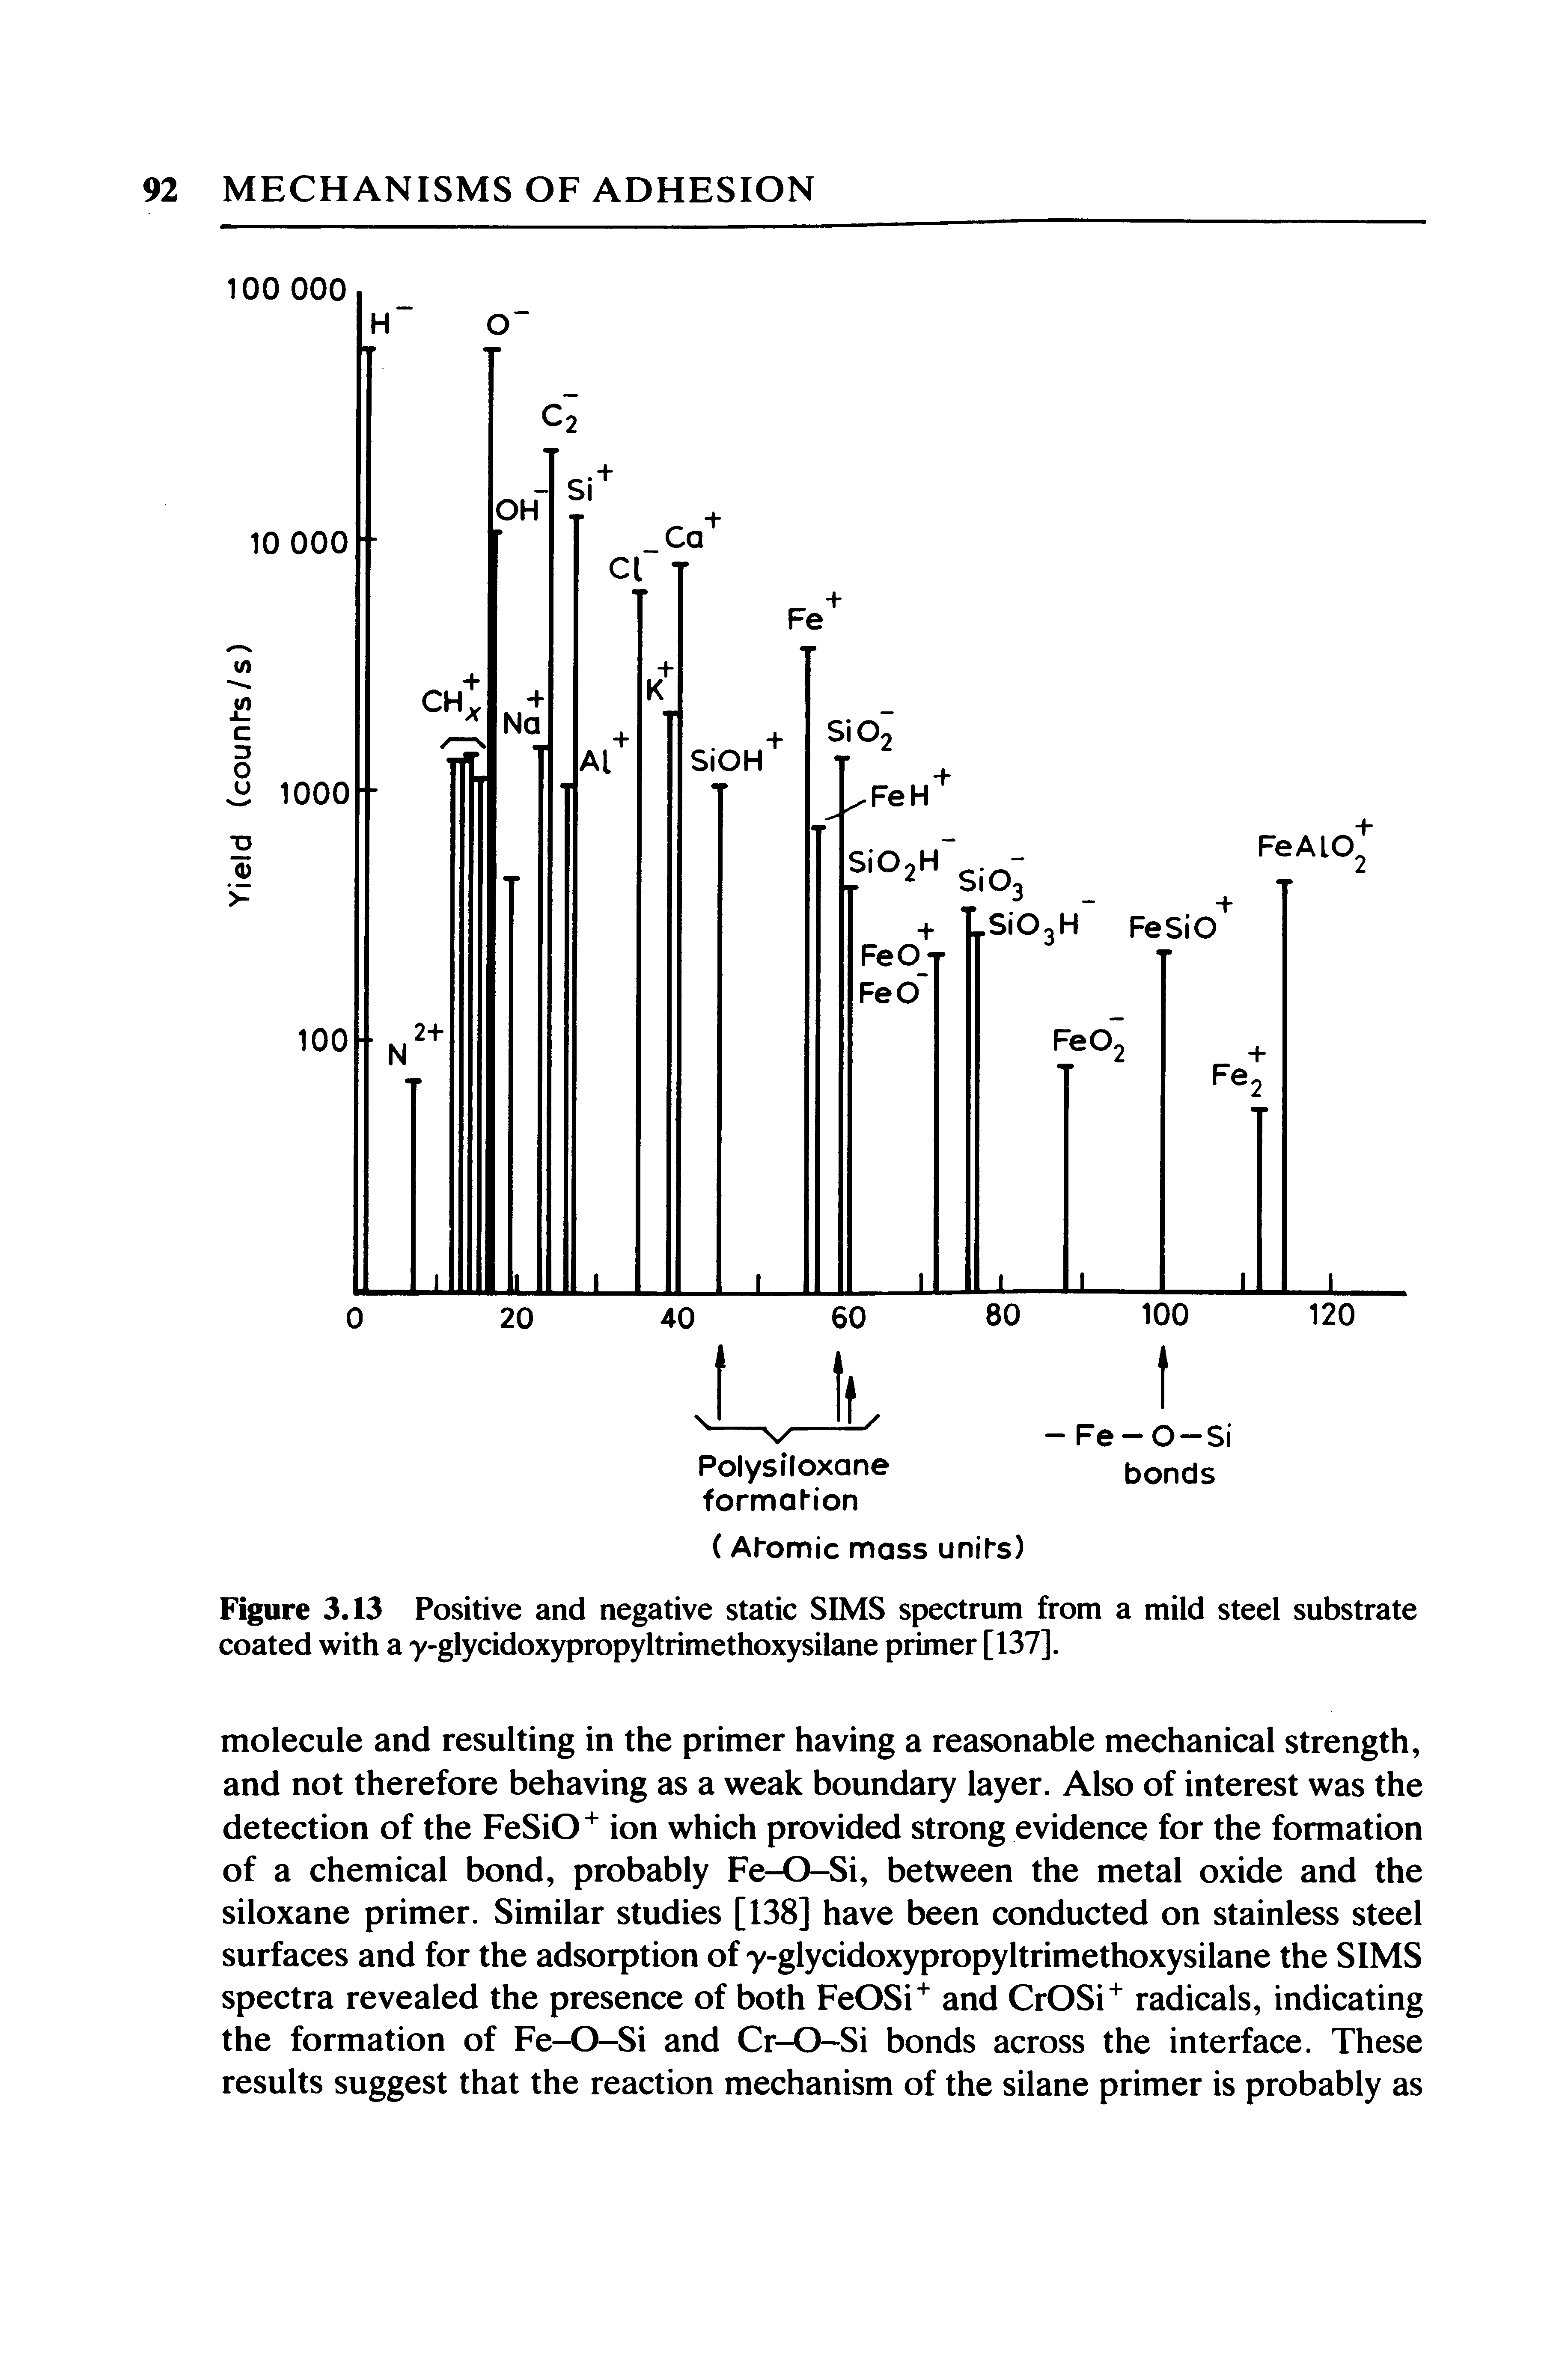 Figure 3.13 Positive and negative static SIMS spectrum from a mild steel substrate coated with a y-glycidoxypropyltrimethoxysilane primer [137].